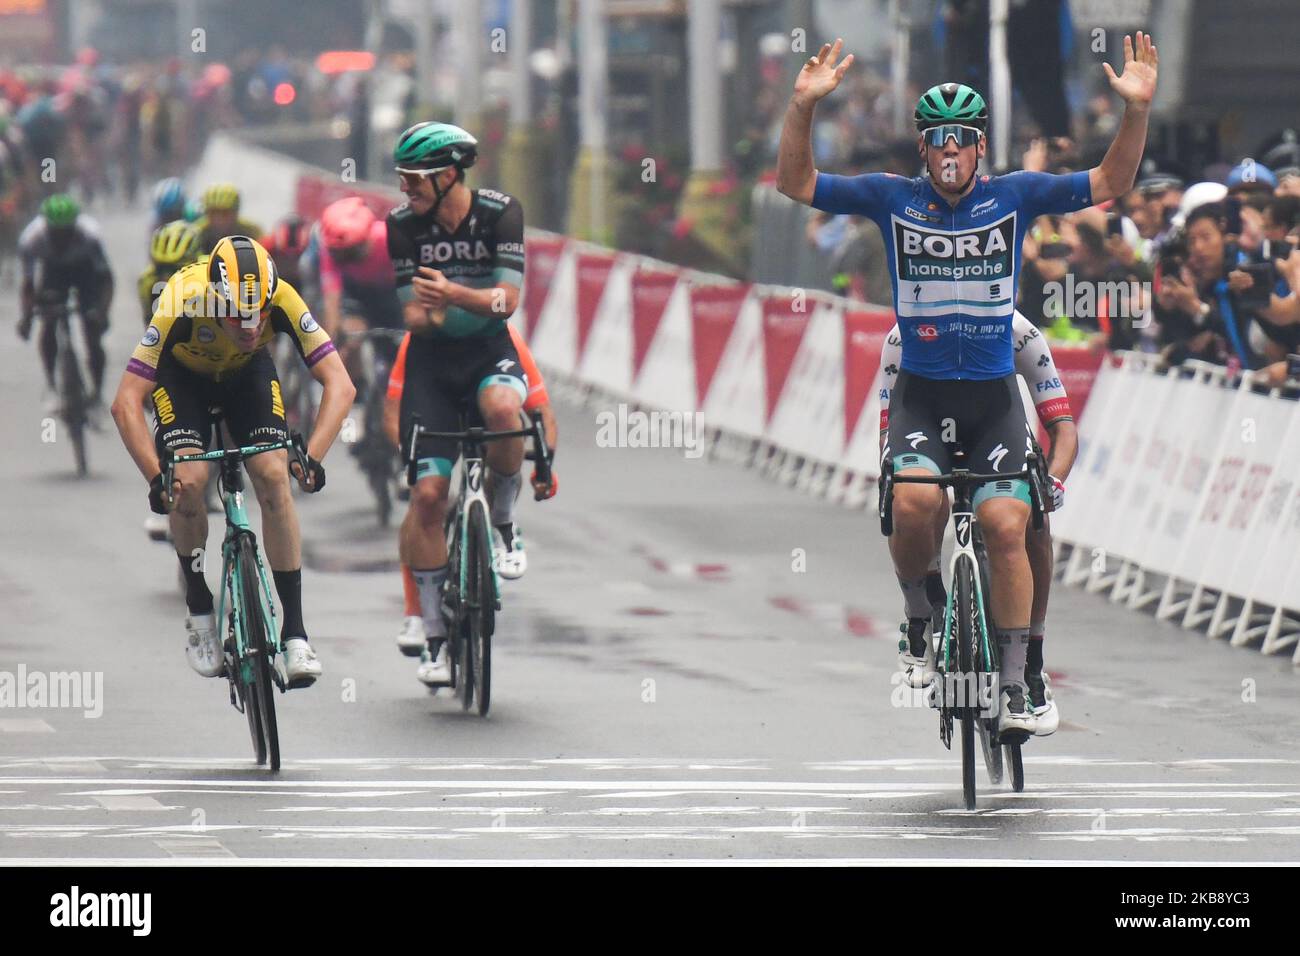 Pascal Ackermann (Right) of Germany and Team Bora-Hansgrohe, wins the six stage, 168.3km Guilin Stage Race, of the 3rd edition of the Cycling Tour de Guangxi 2019, . On Tuesday, October 22, 2019, in Guilin, Guangxi Region, China. (Photo by Artur Widak/NurPhoto) Stock Photo